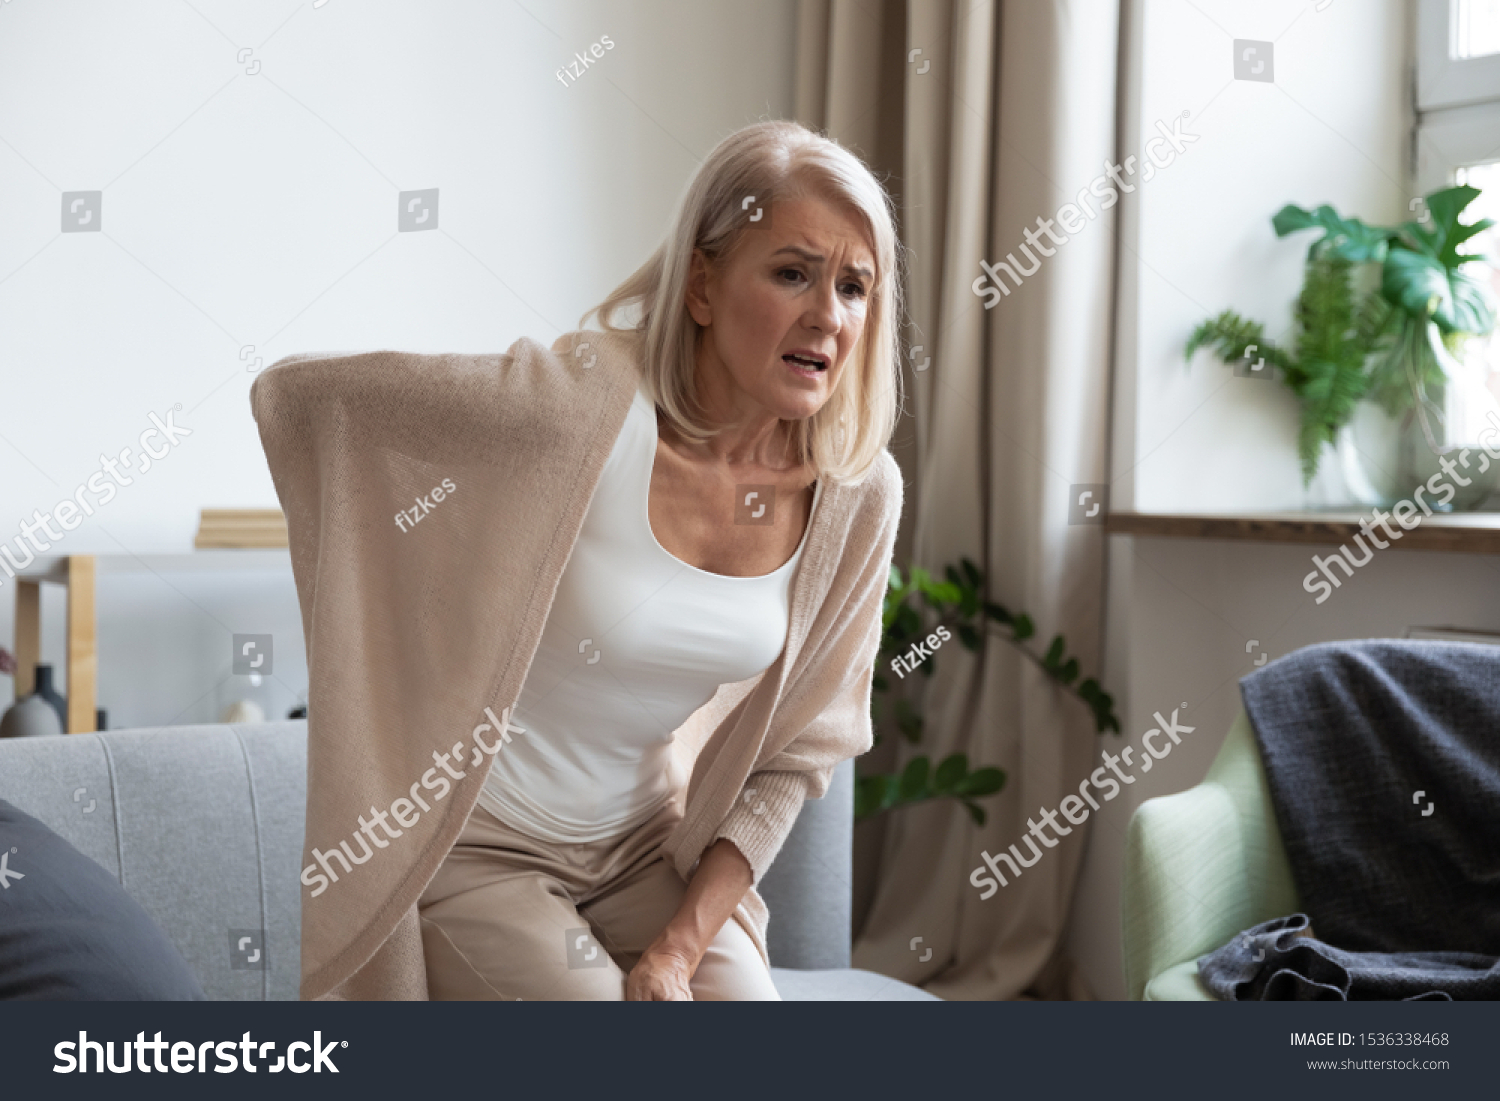 Worried Upset Middle Aged Mature Woman